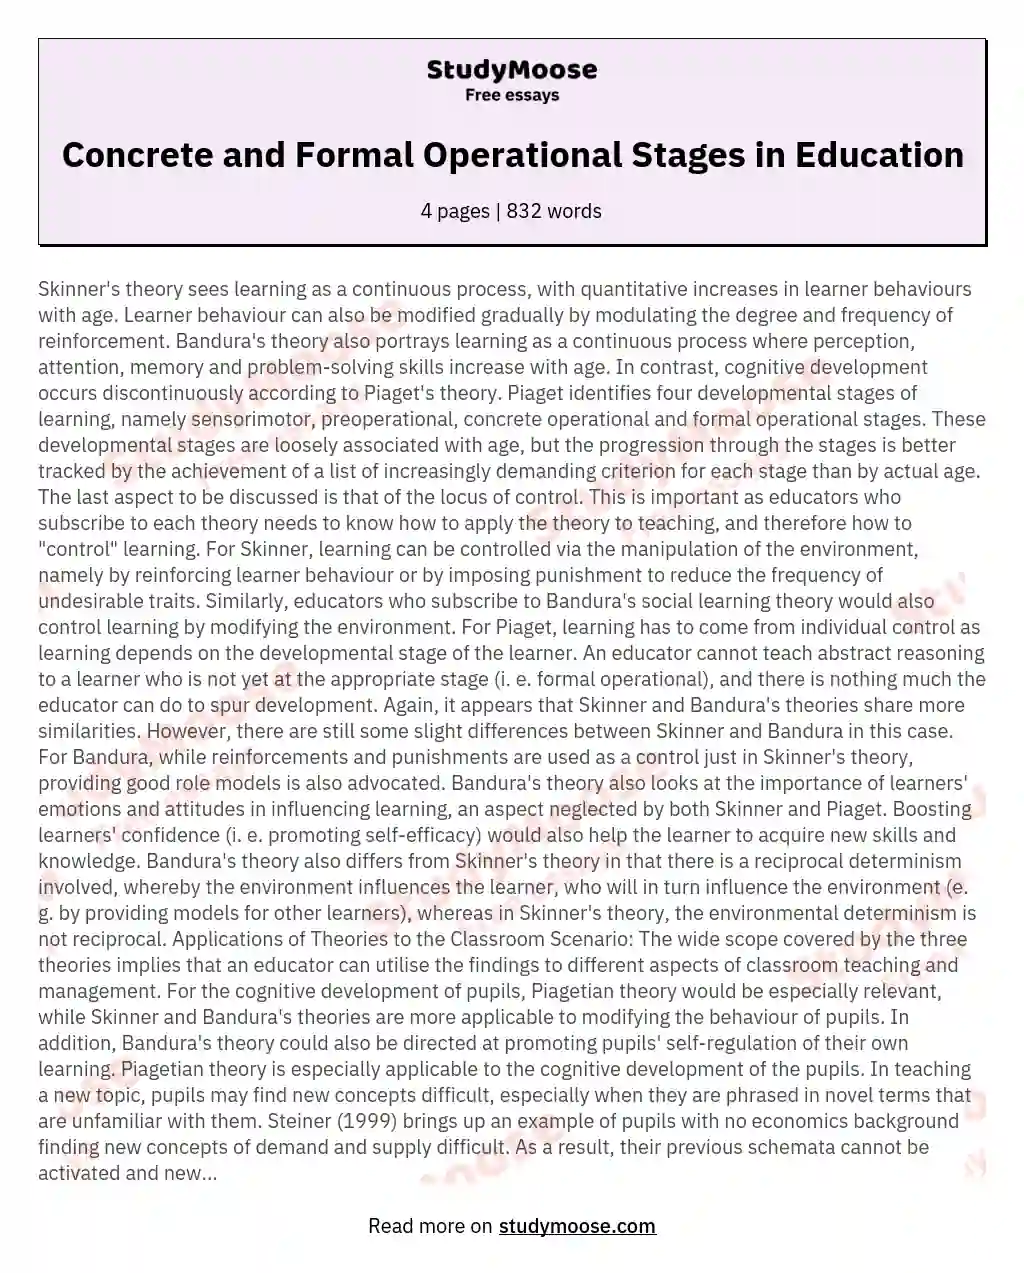 Concrete and Formal Operational Stages in Education essay